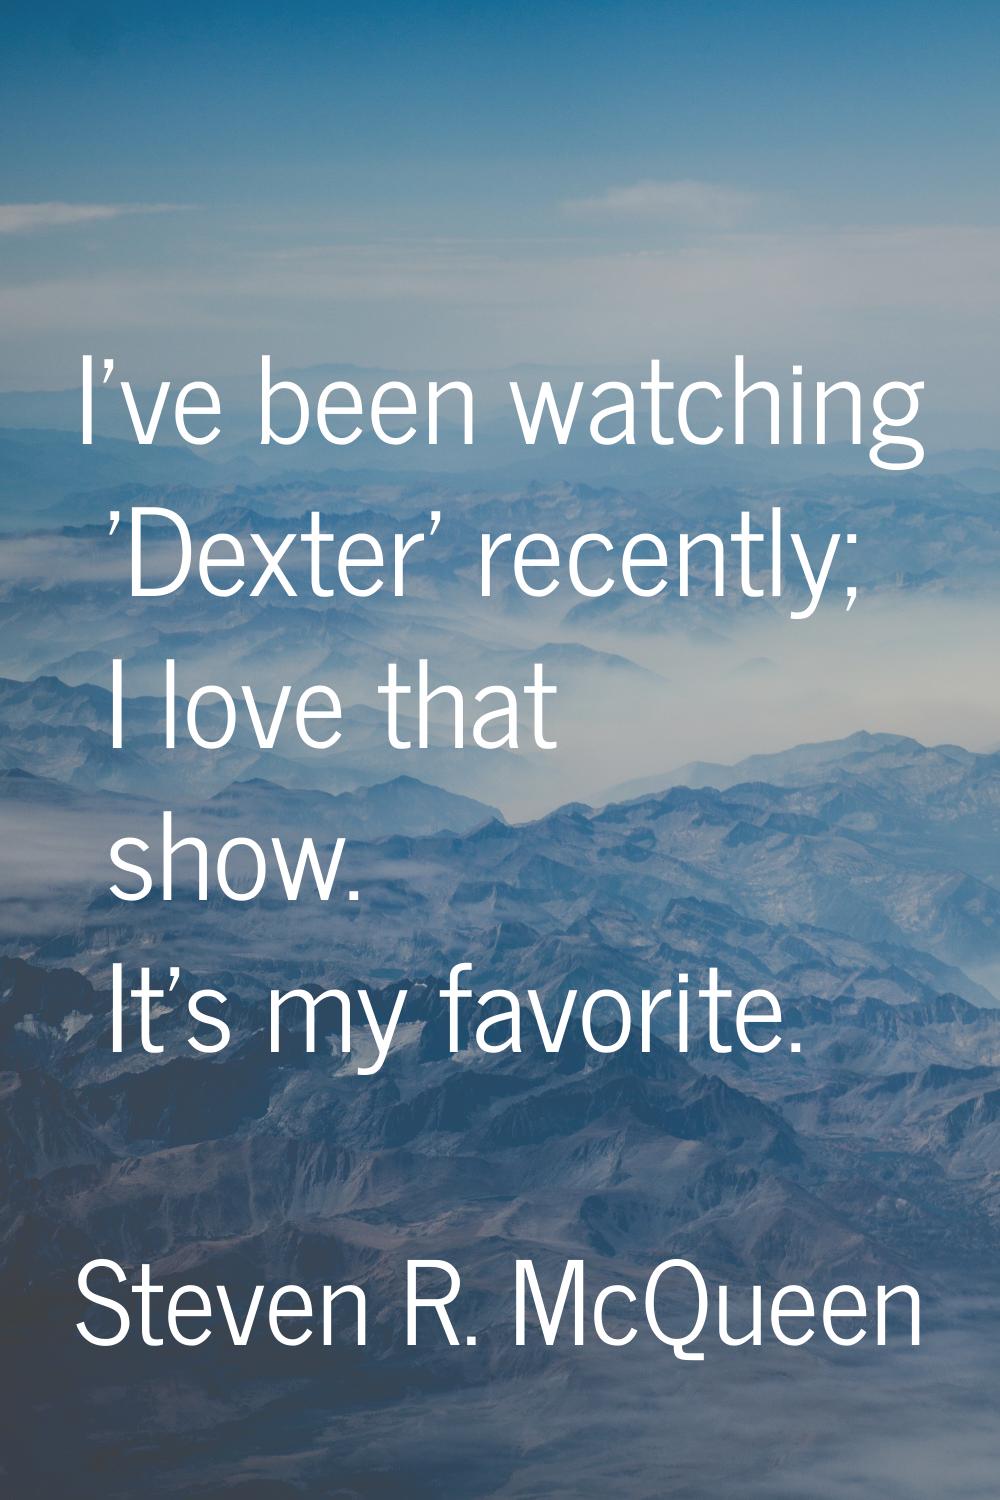 I've been watching 'Dexter' recently; I love that show. It's my favorite.